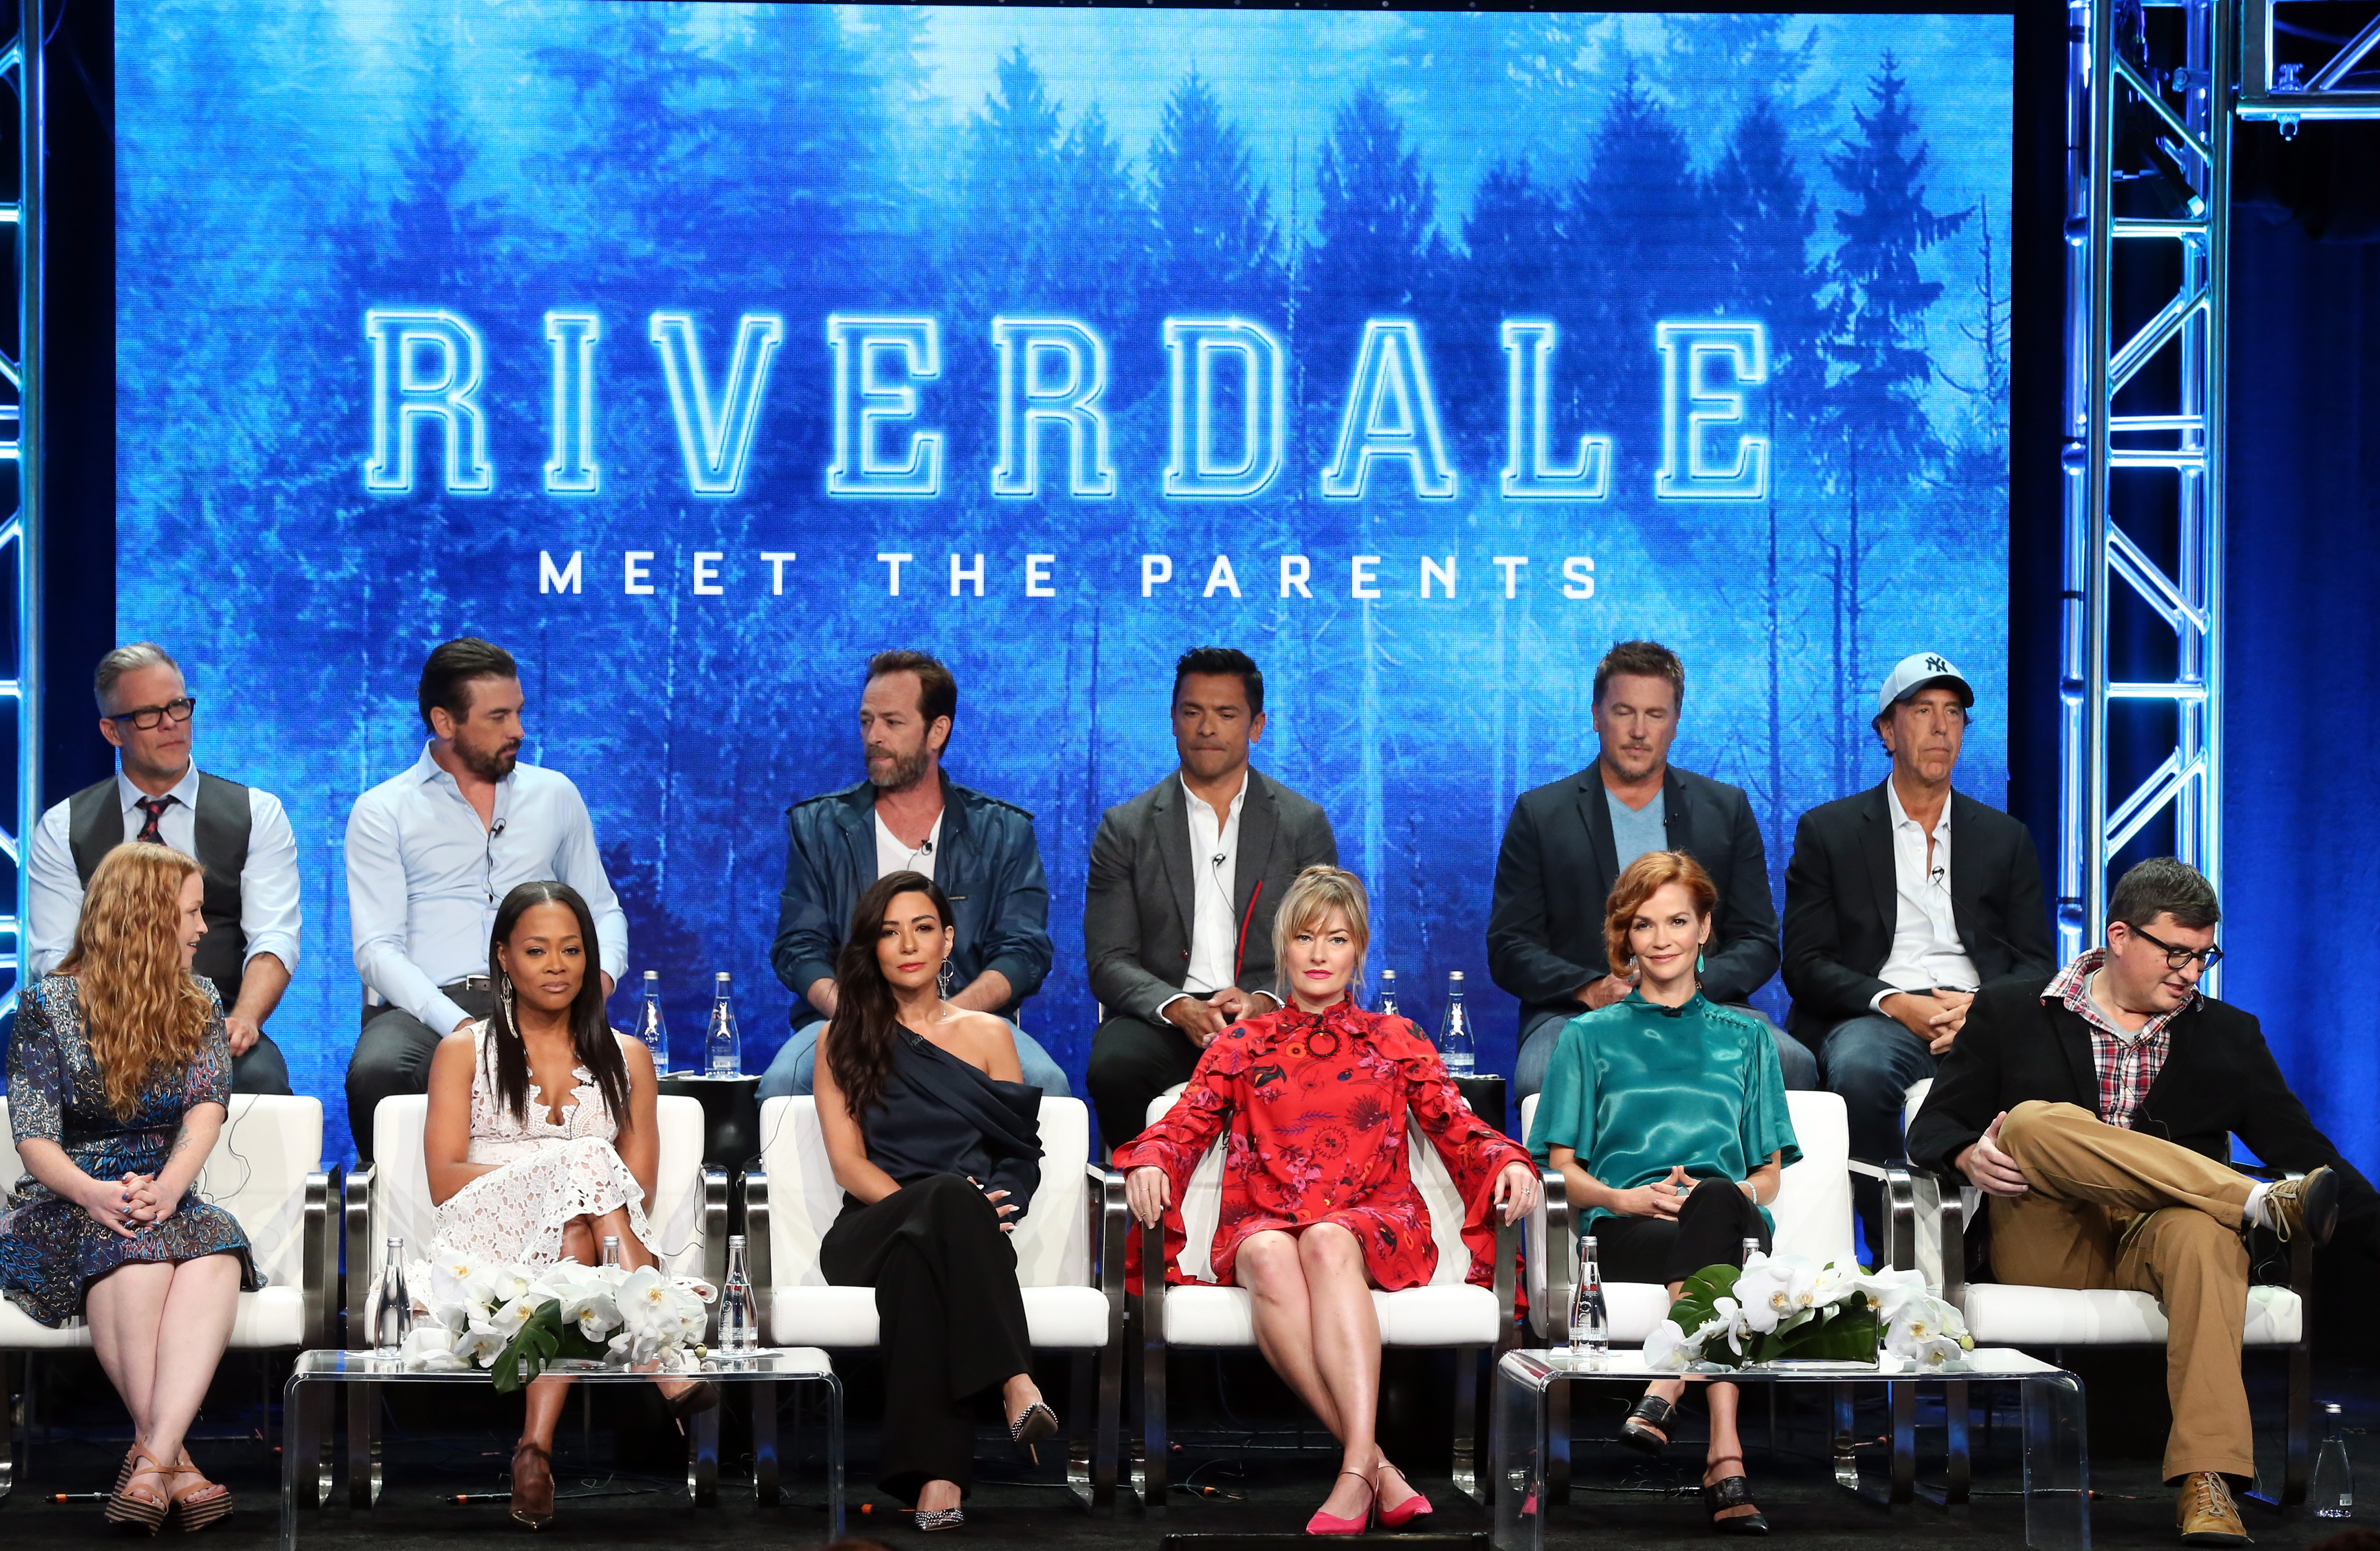 Luke Perry (third from the left in the back row) was part of the cast of "Riverdale" 